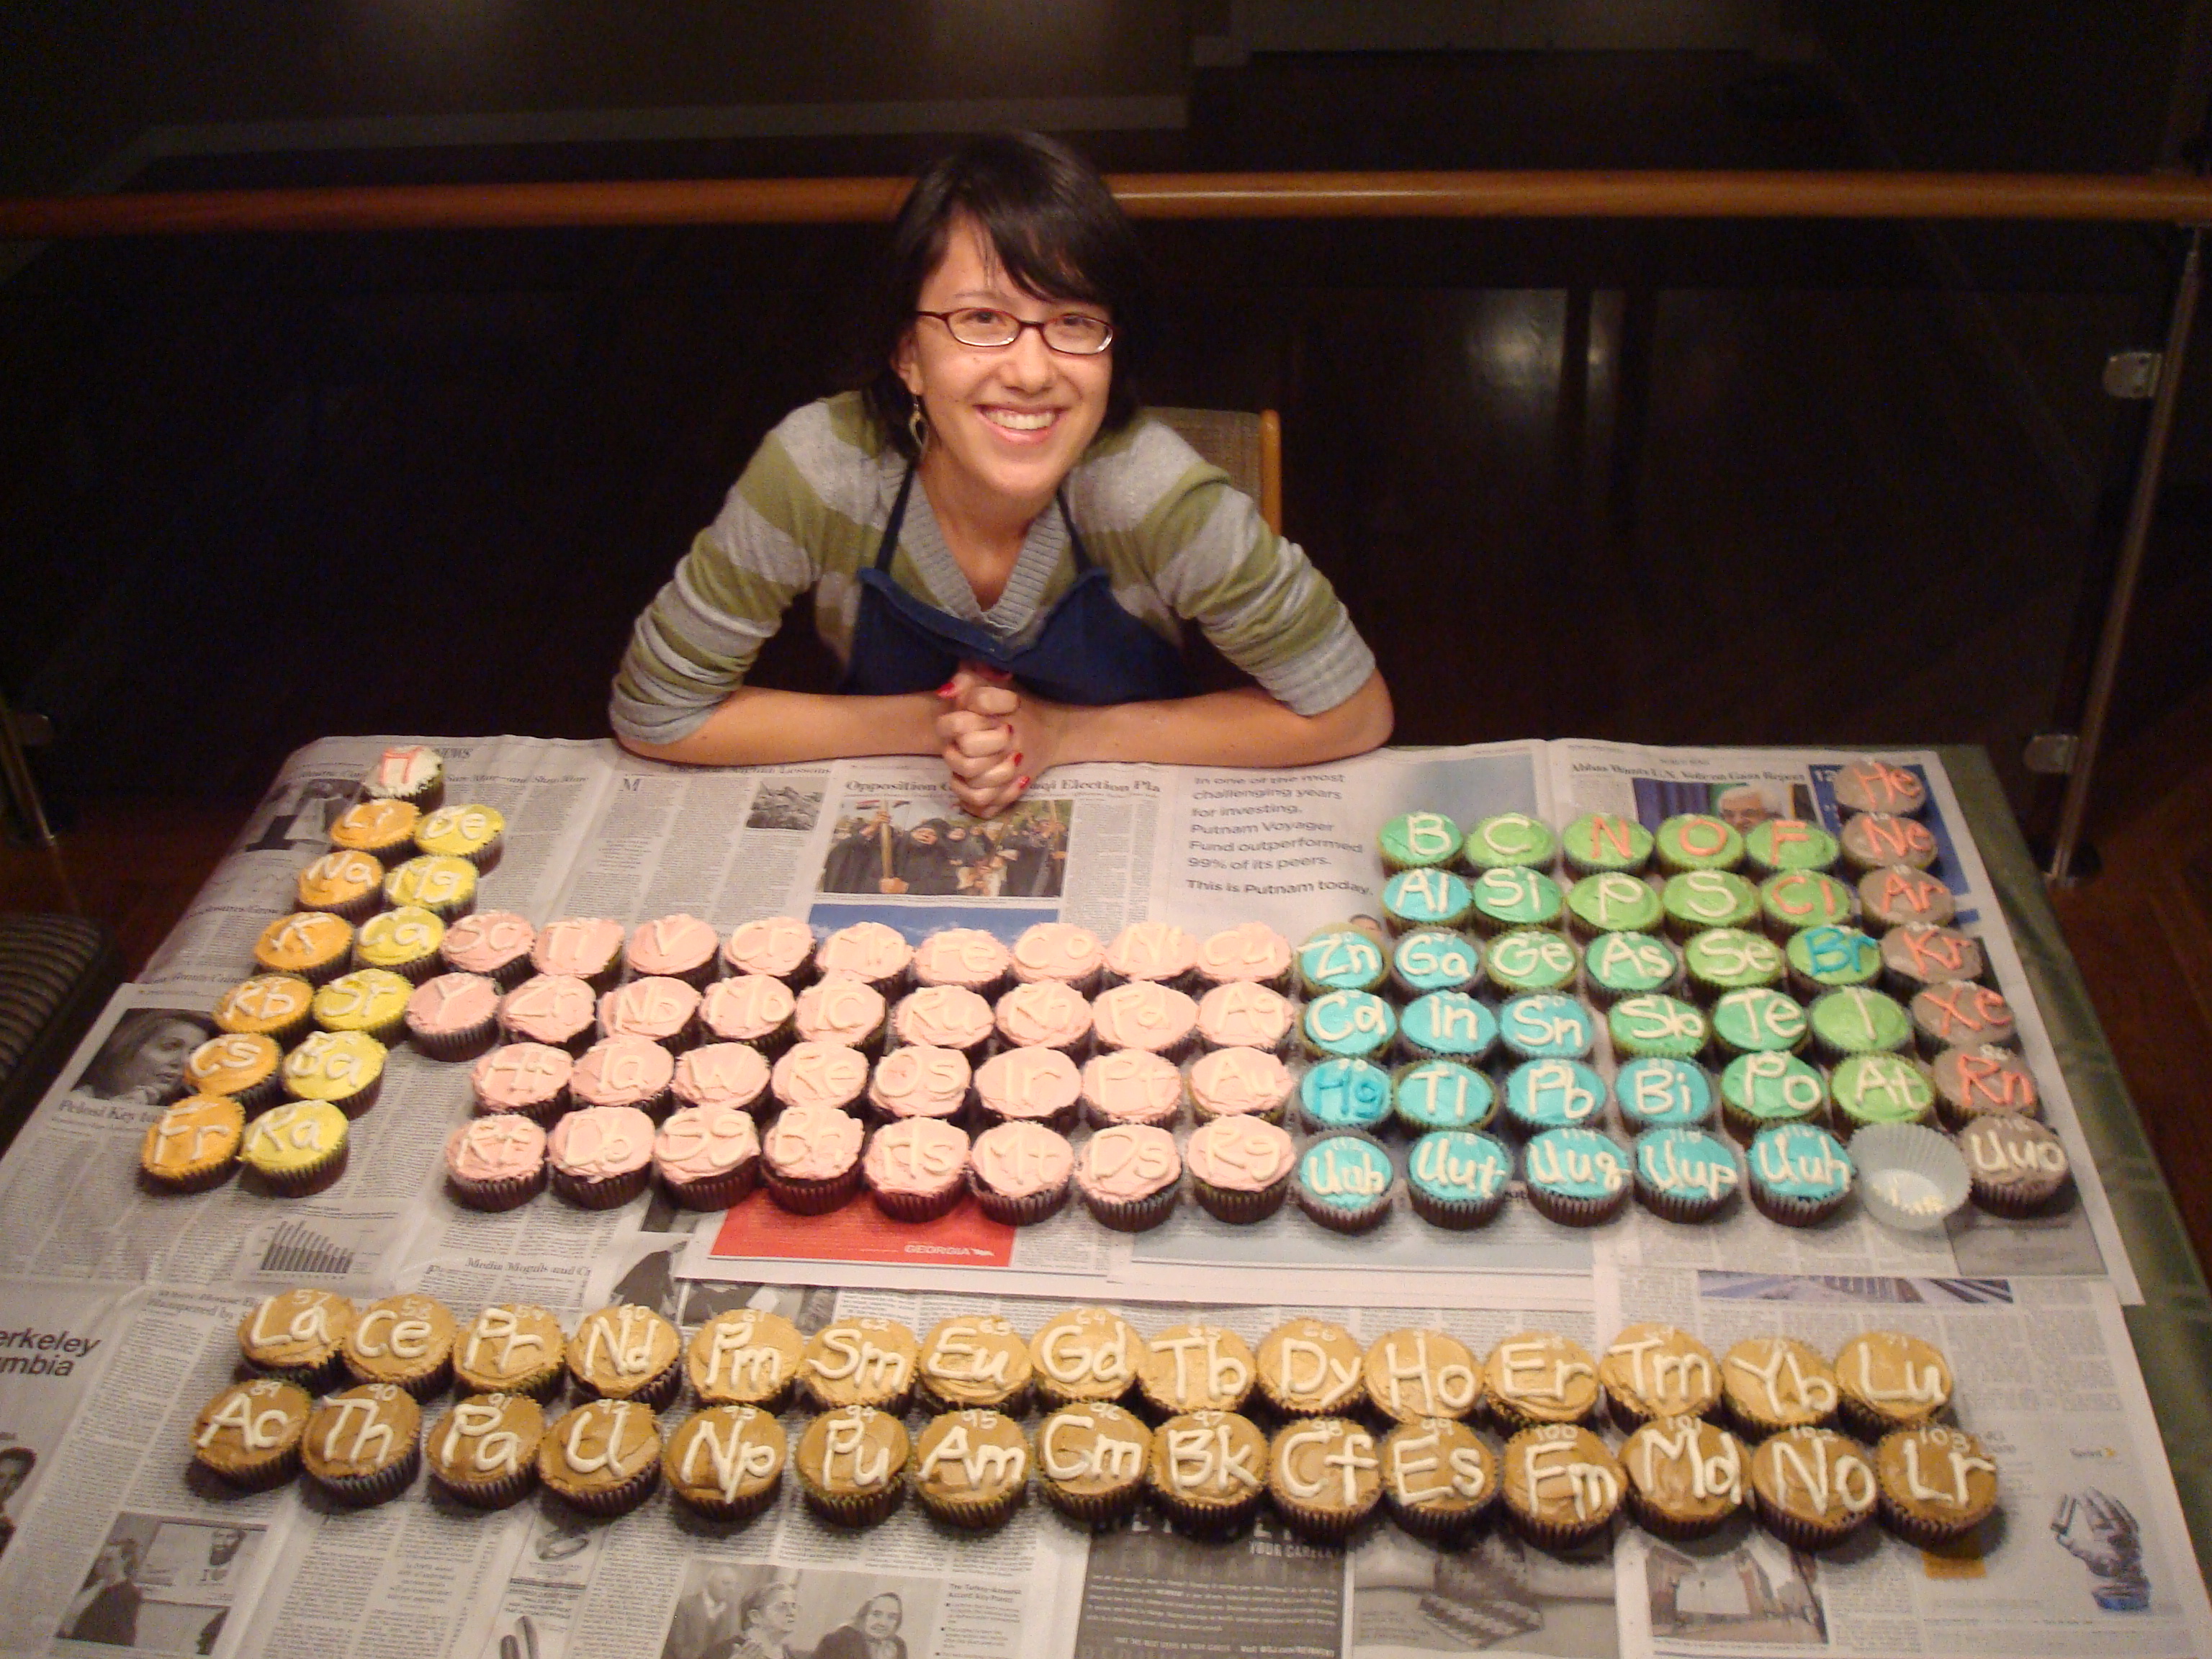 Guys from Foodie Friday Make Periodic Table Cupcakes! Technology Joins